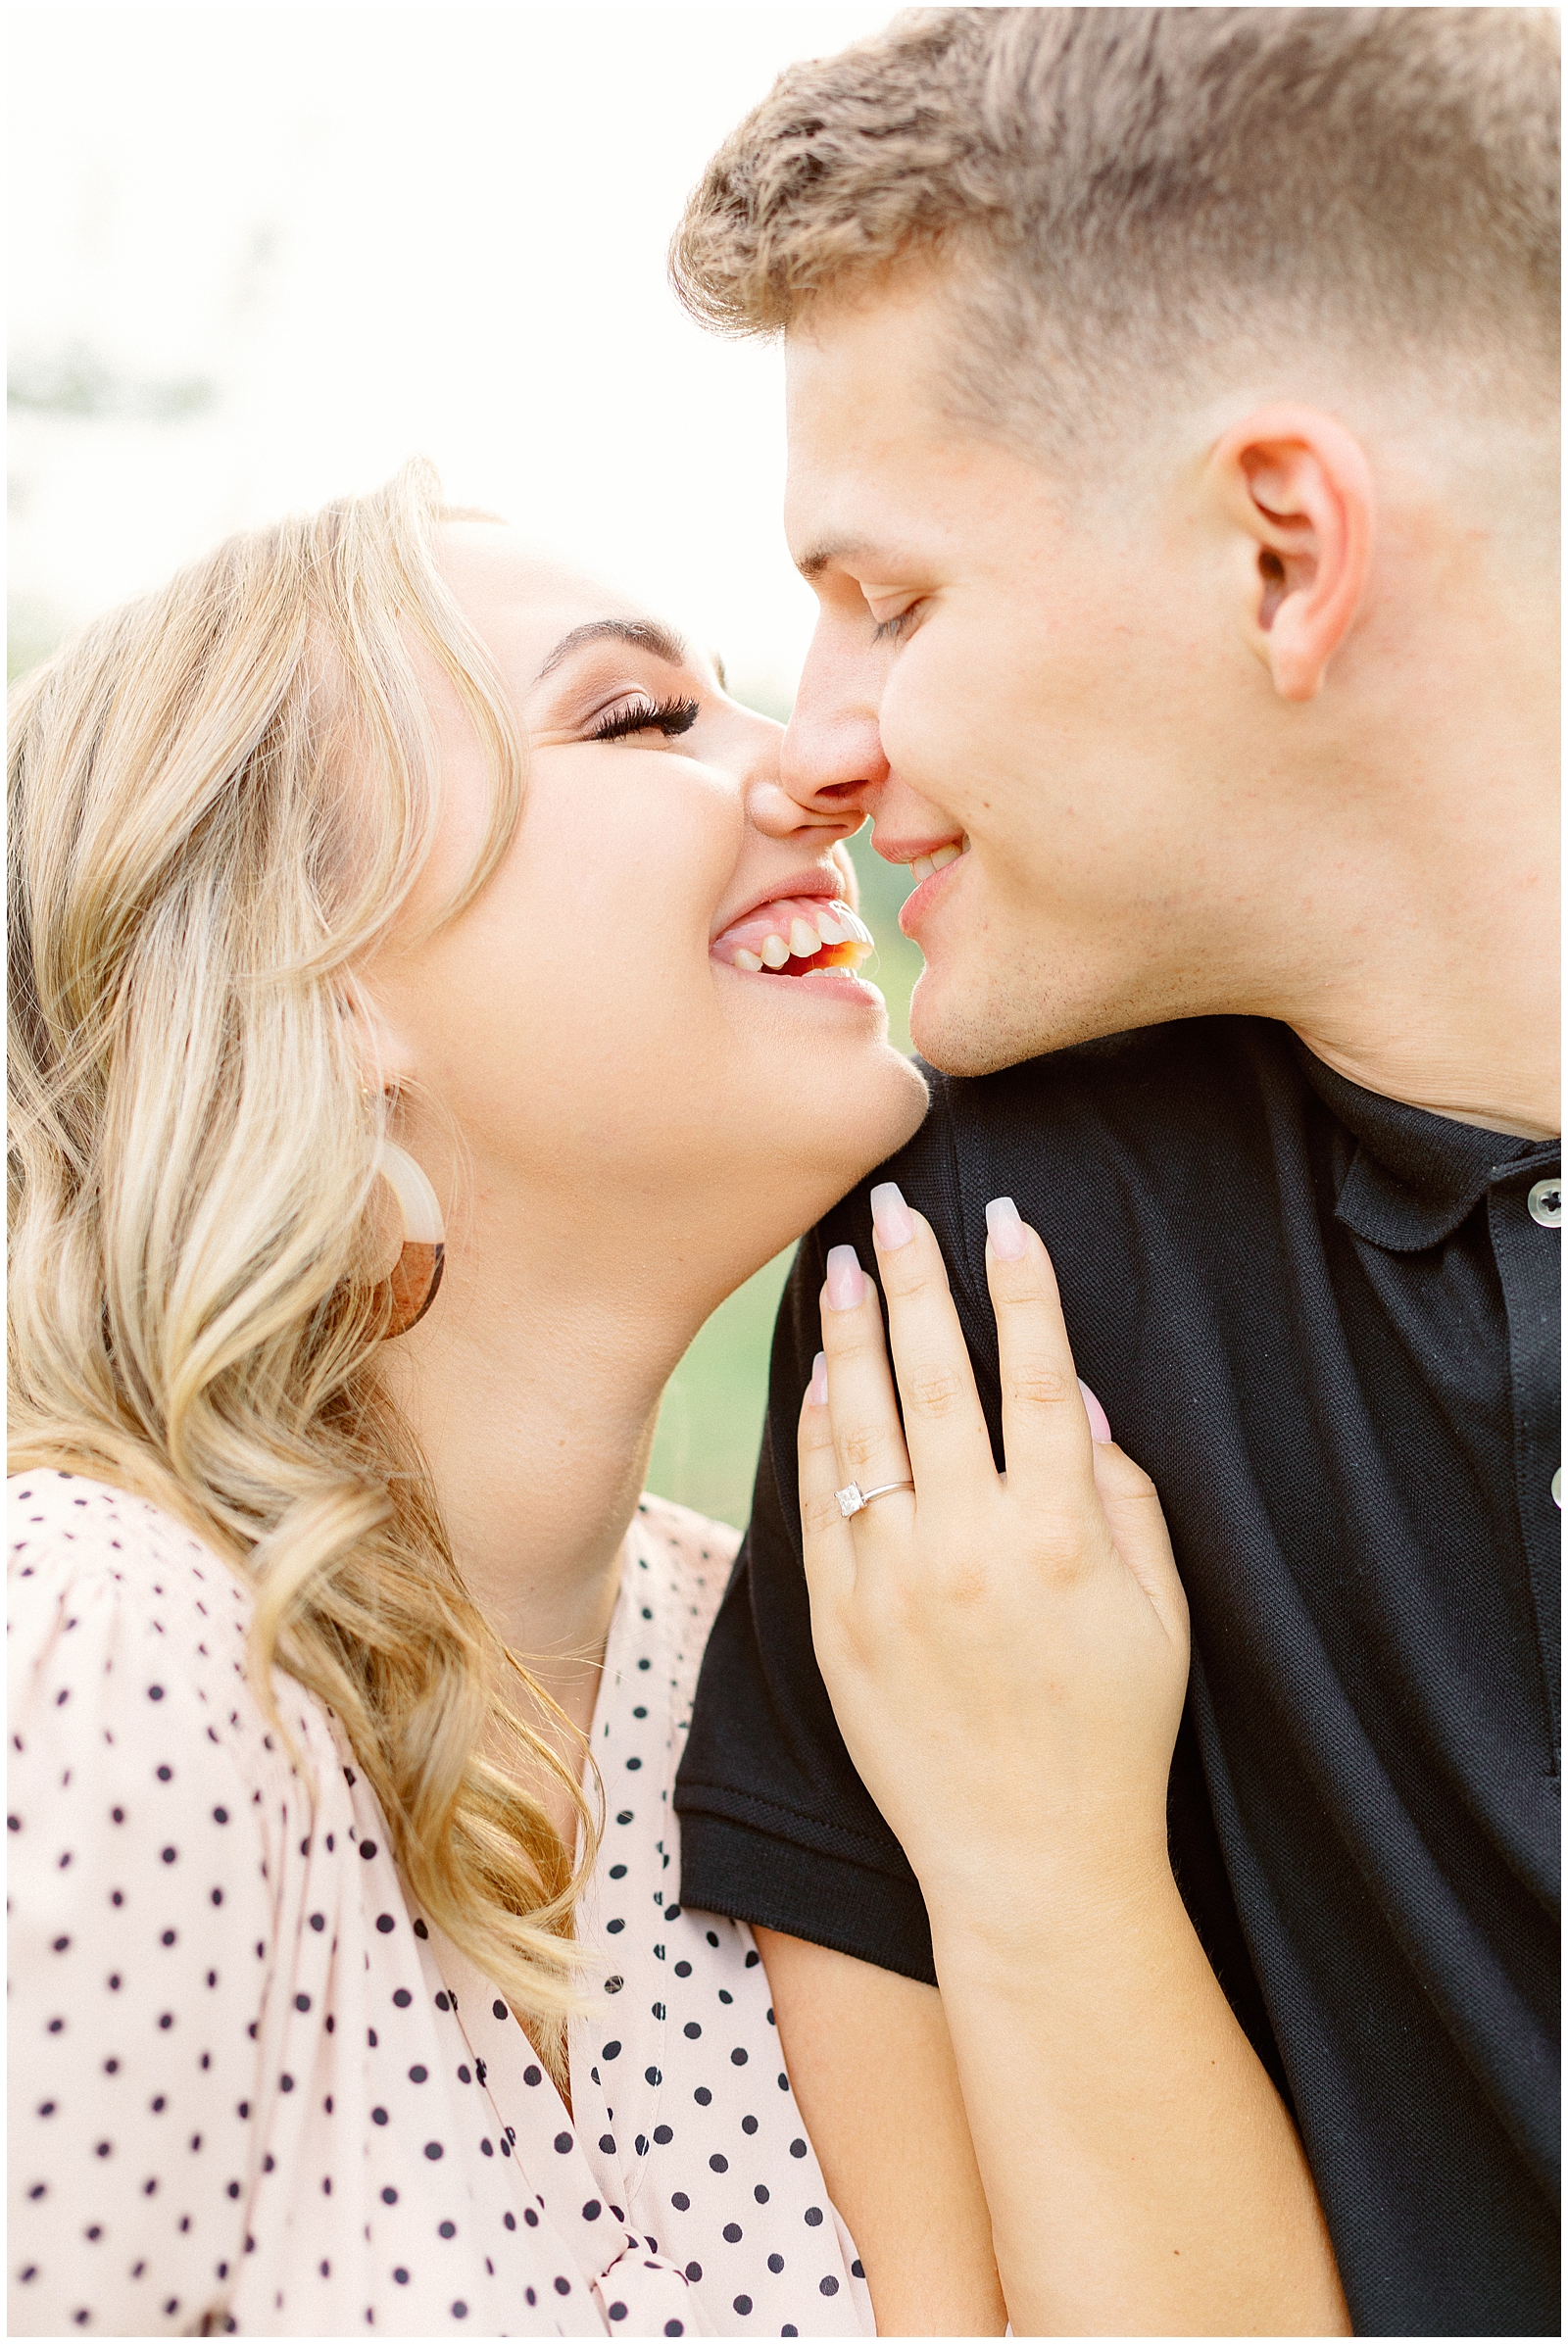 Romantic Summer Orchard Engagement Session in Boise Idaho